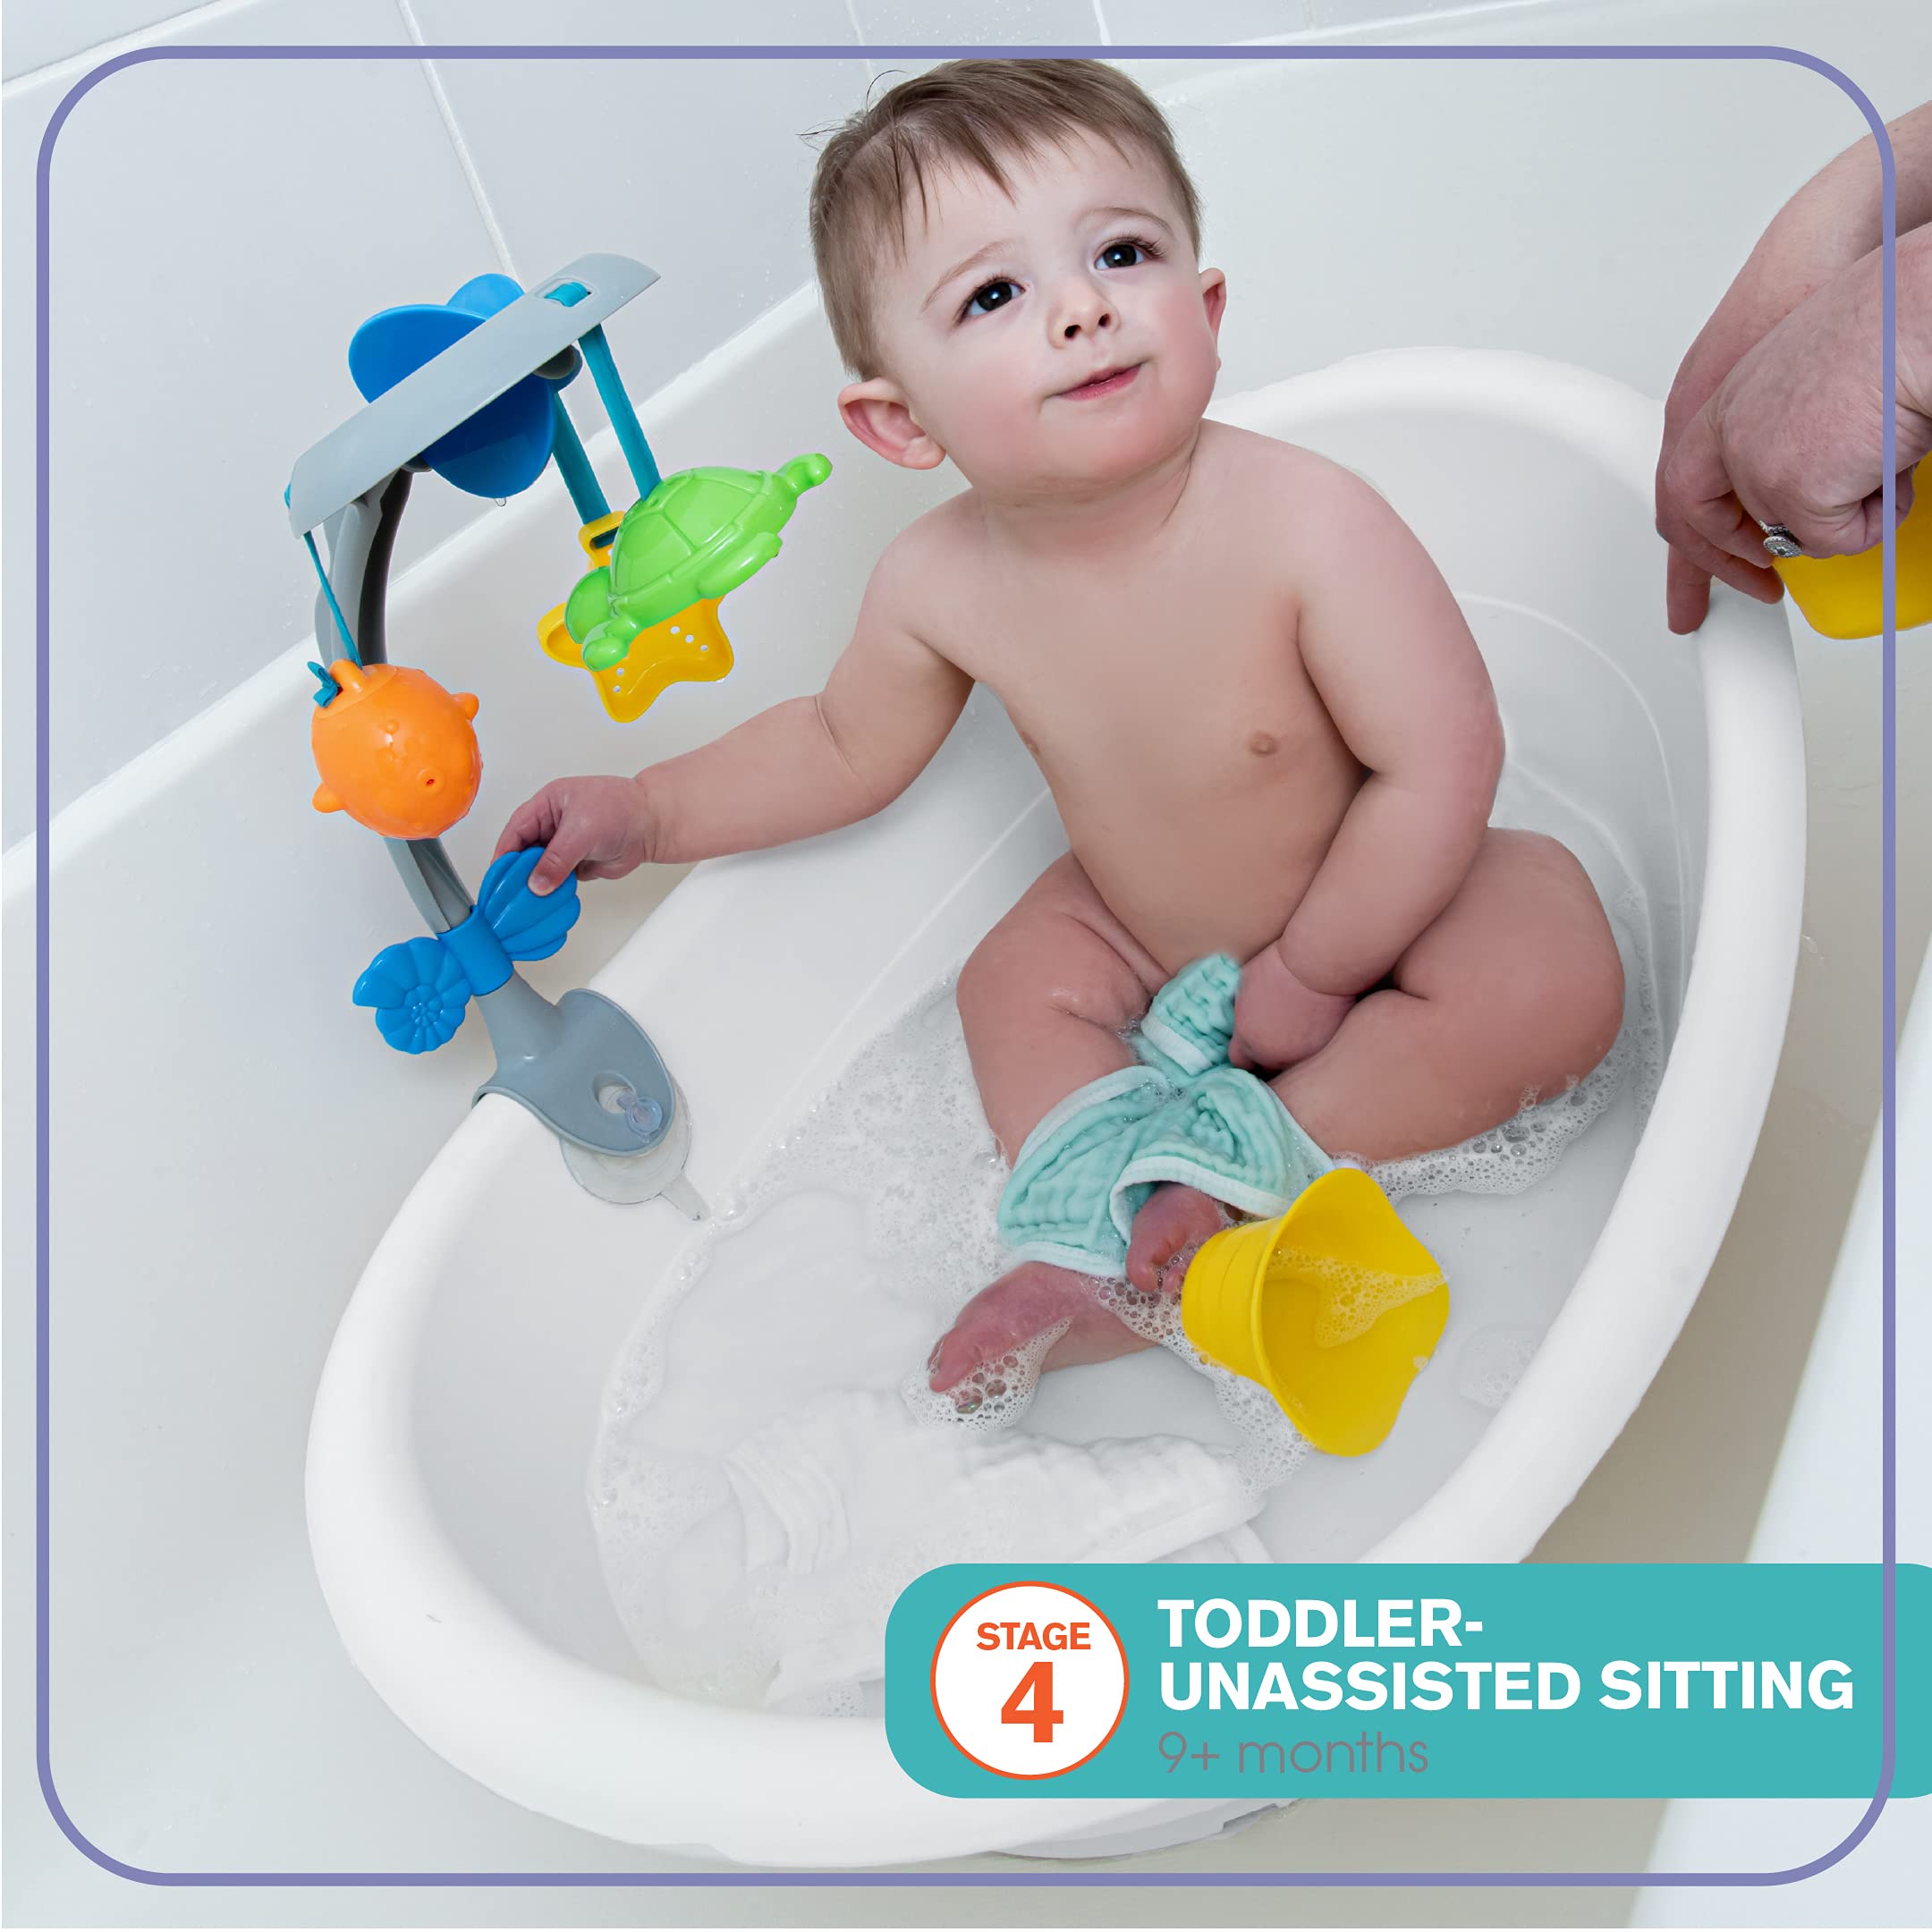 Summer Gentle Support Multi-Stage Tub with Toys - for Ages 0-24 Months - Includes Soft Support, Toy bar and Bath Toys, A Hook for Storage and Dying, and A Drain Plug, White/Blue, One Size